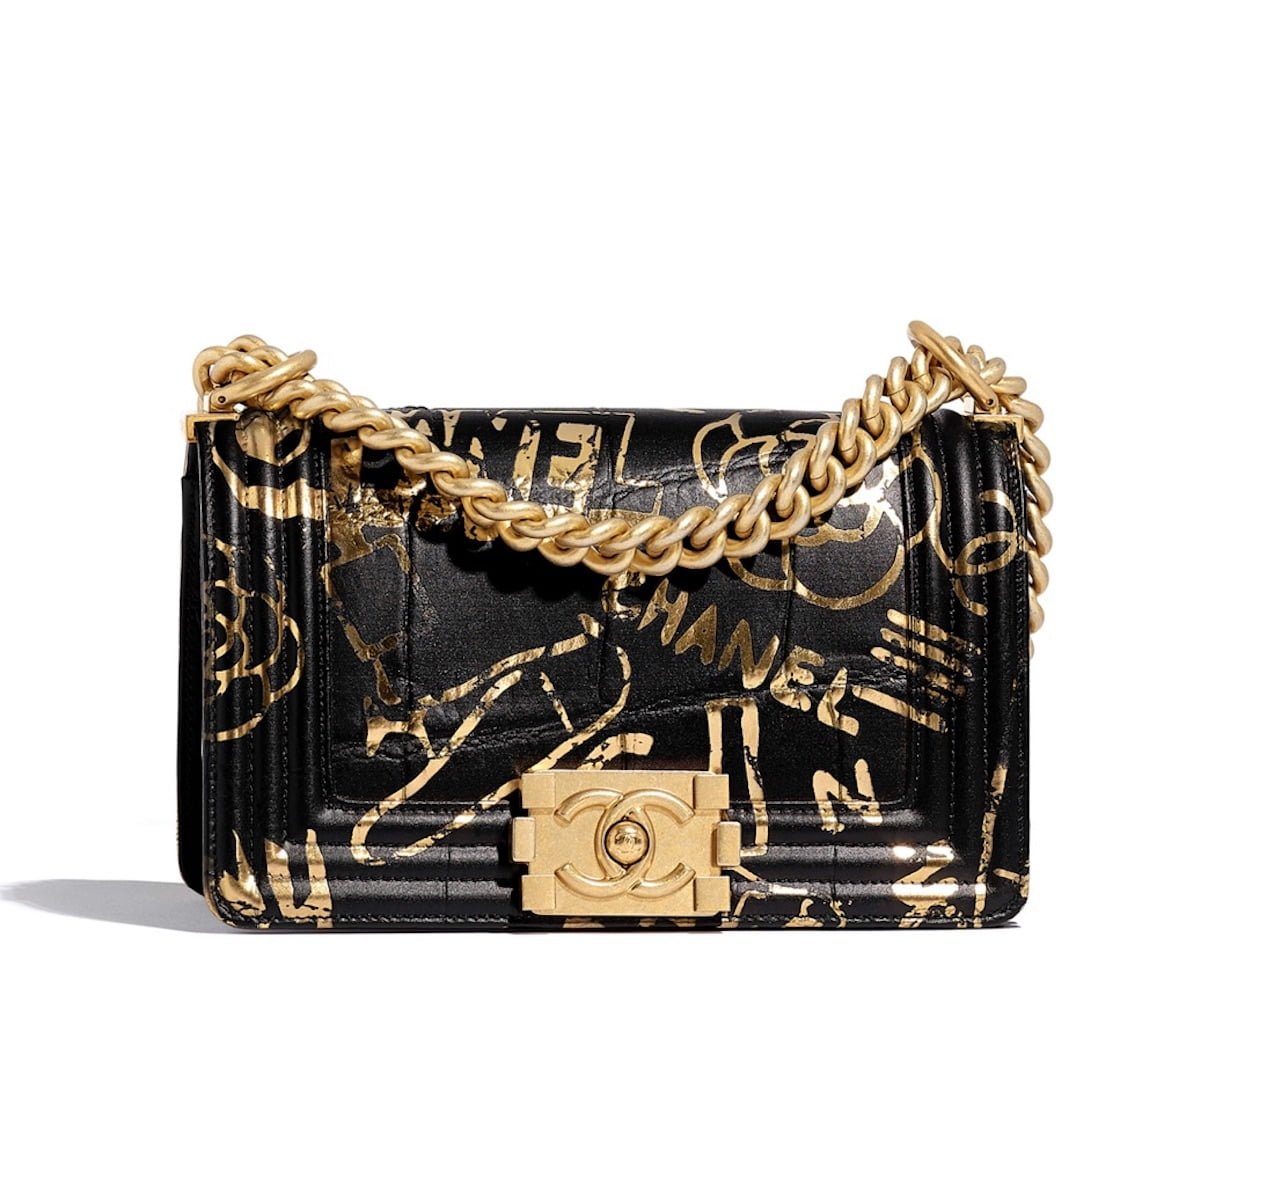 CHANEL, GOLD METALLIC LIMITED EDITION SMALL BOY BAG IN LAMBSKIN WITH CC  CUT-OUT DETAILING AND GOLD TONE HARDWARE, 2015, Handbags and Accessories, 2020